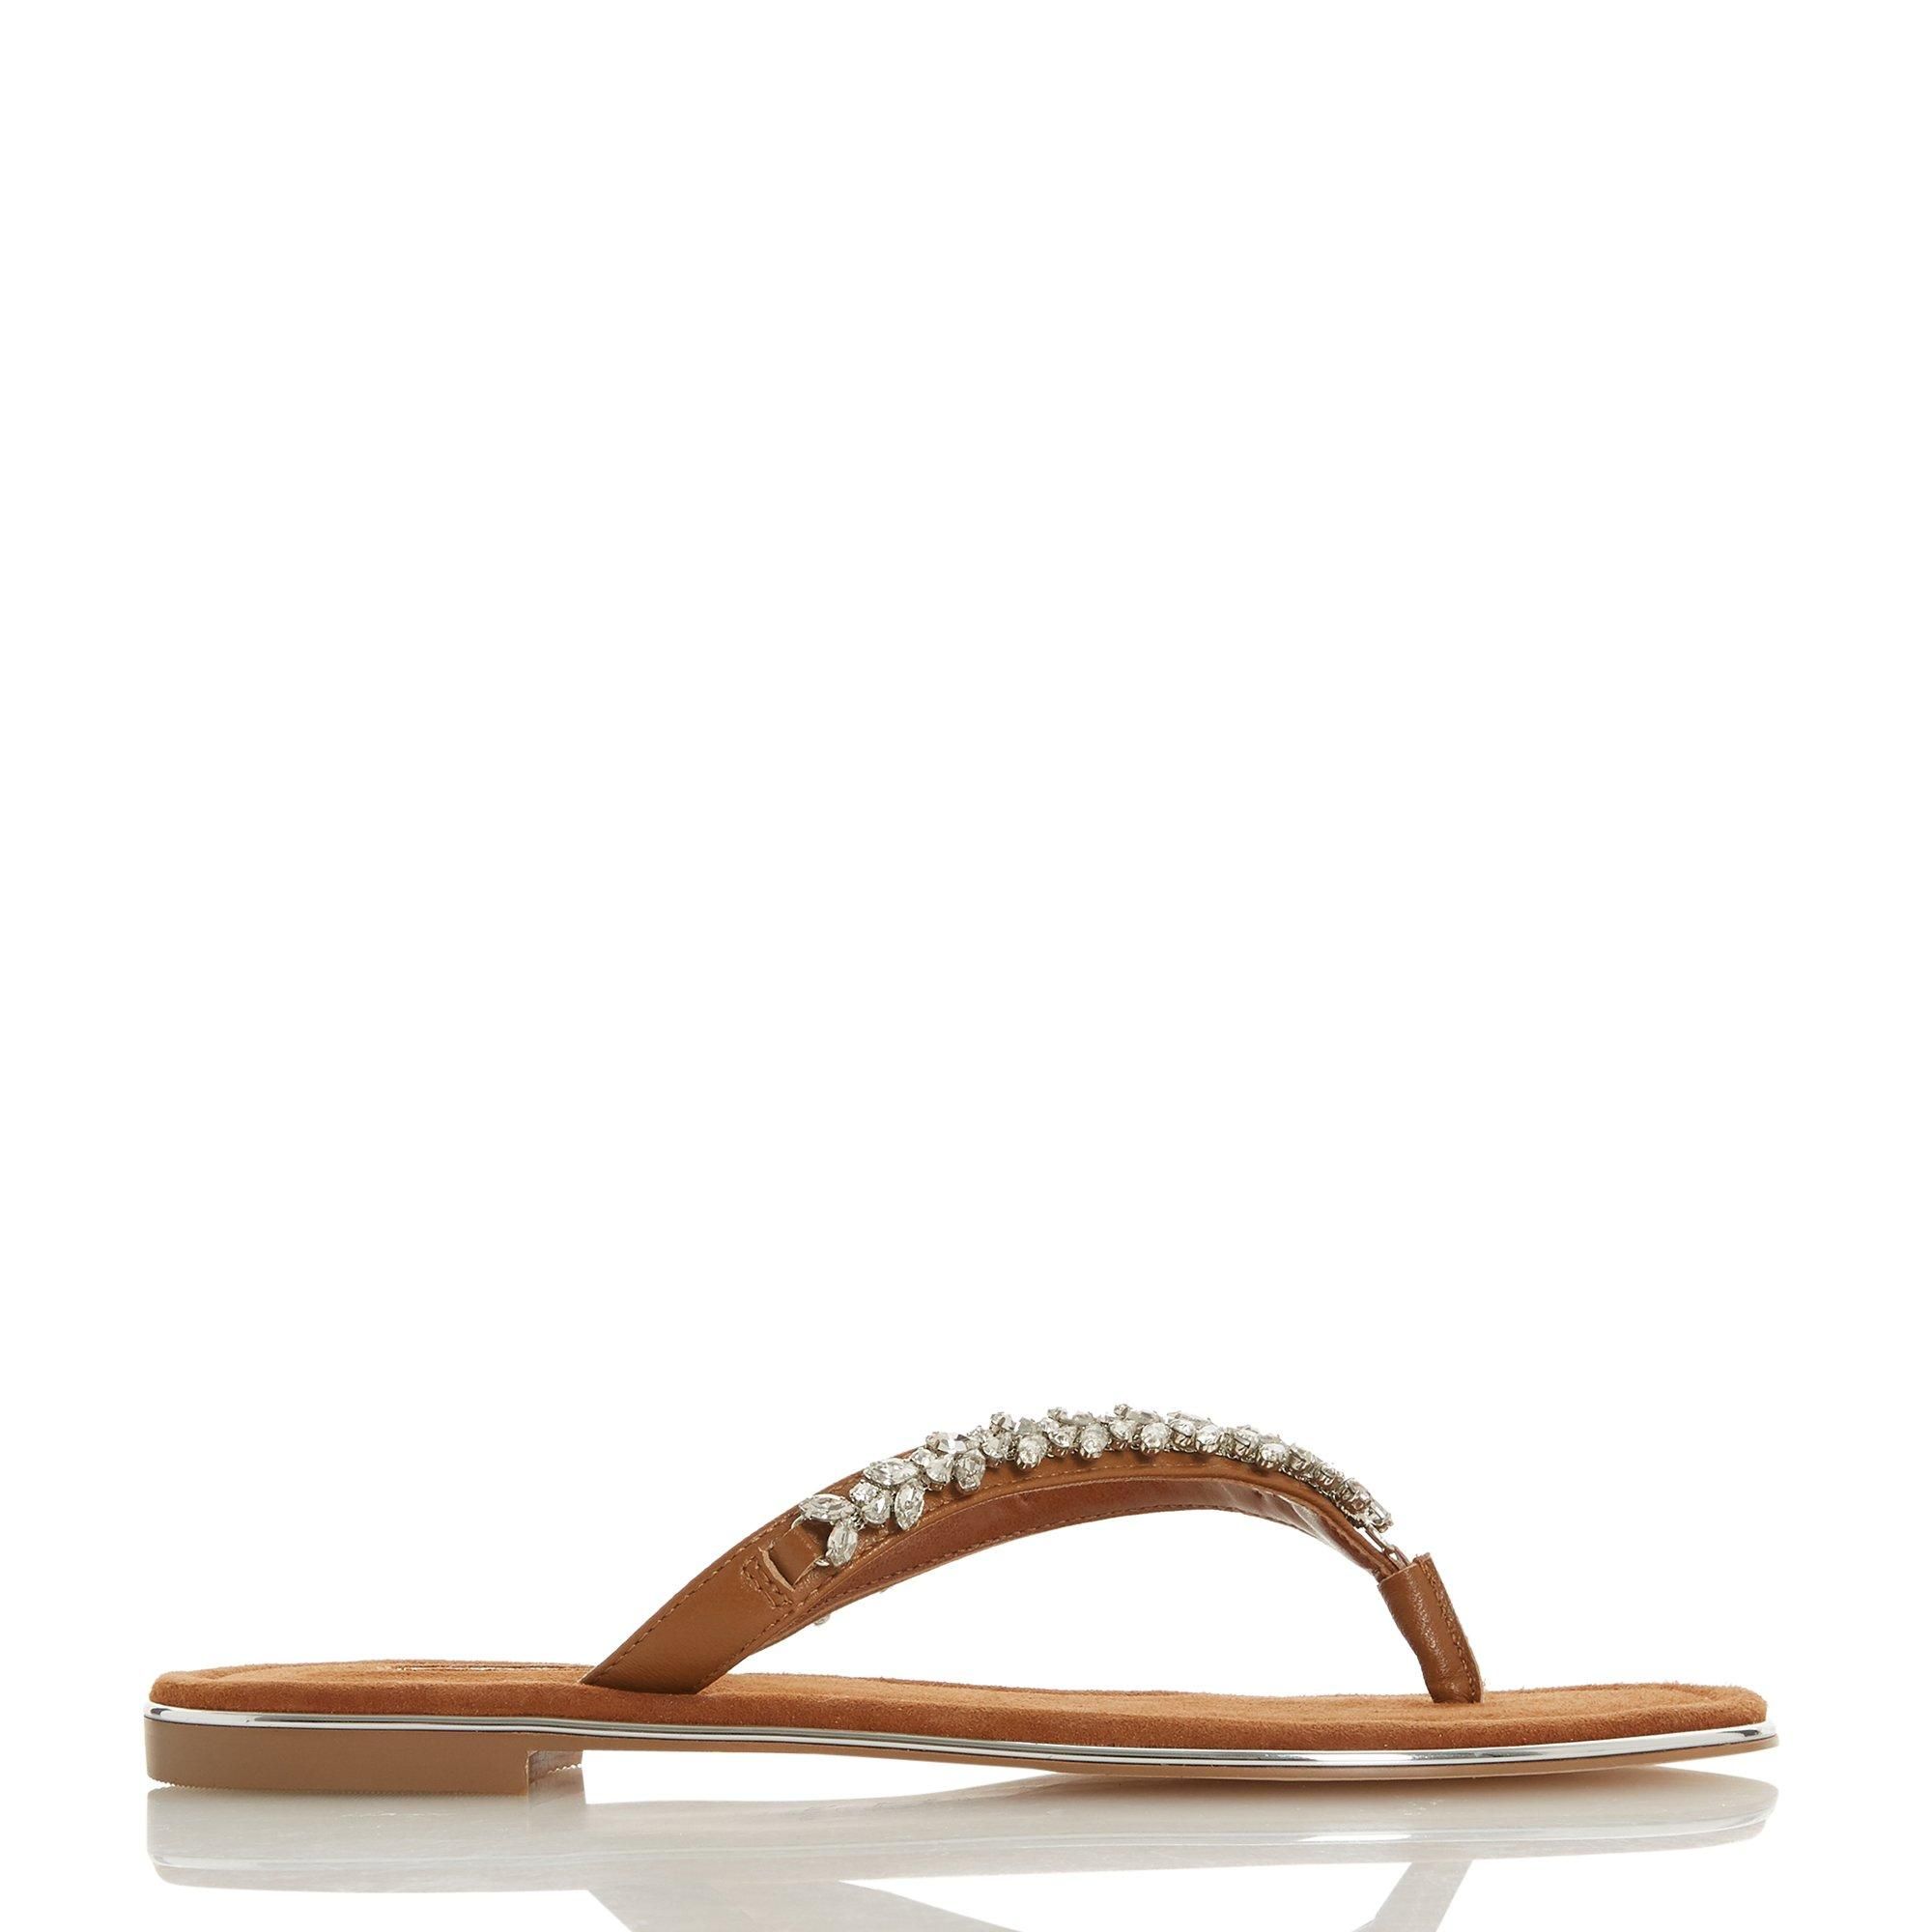 Make a sparkling addition to your summer edit with the Newbey sandal. Showcasing a diamante-encrusted toe post and a low block heel. Silver-tone trims completes this easy slip-on design.